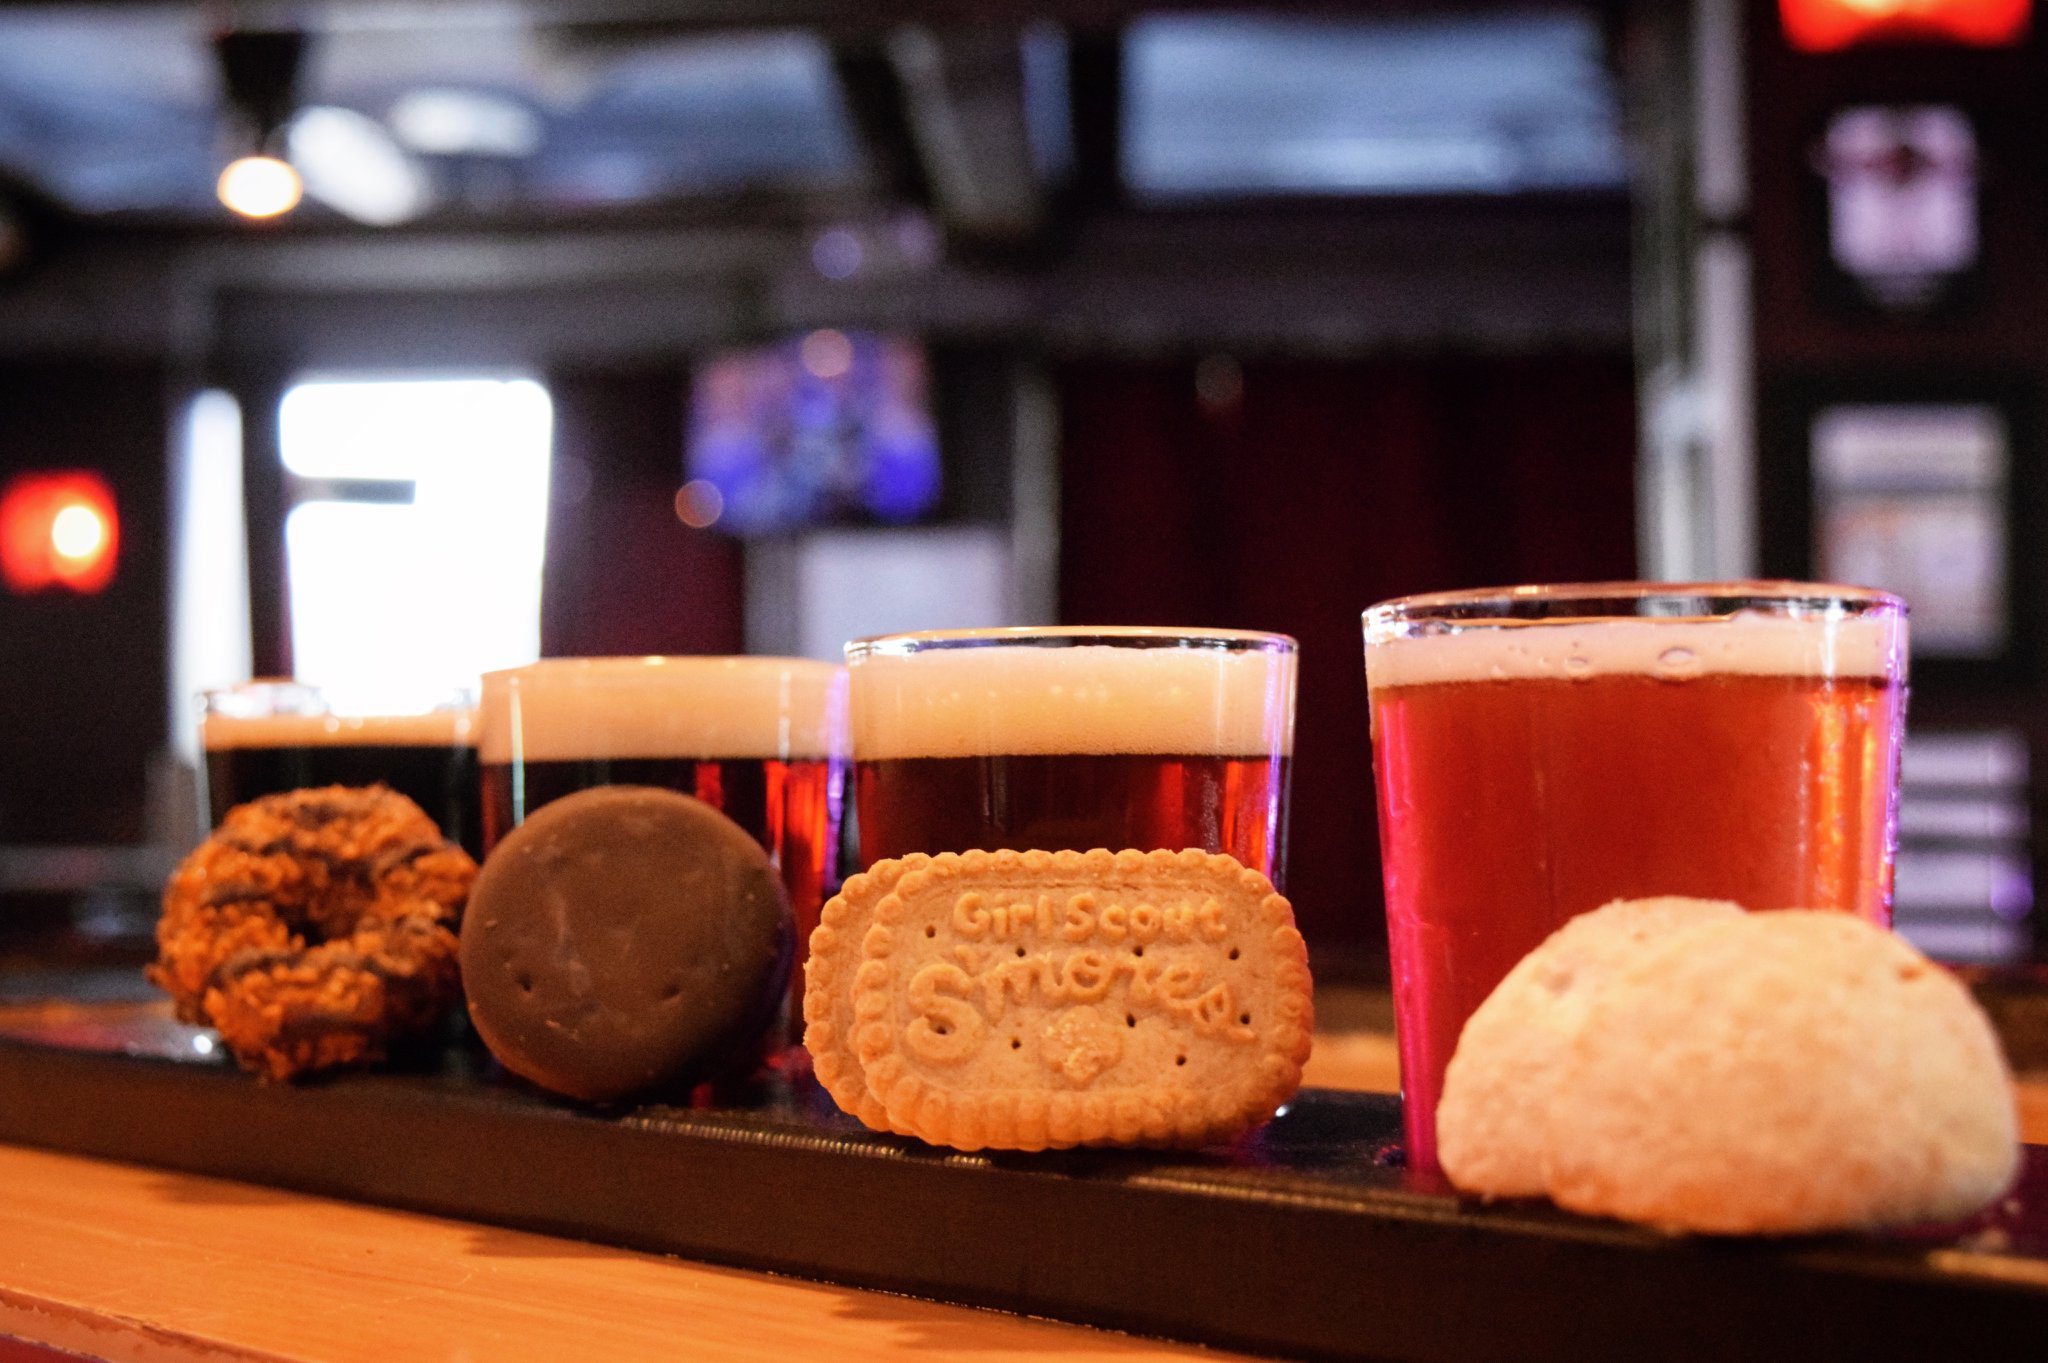 Motorworks Brewing Cookies & Crafts flight with 4 different tasting beers paired with 4 different girl scout cookies next to the appropriate beer in taproom